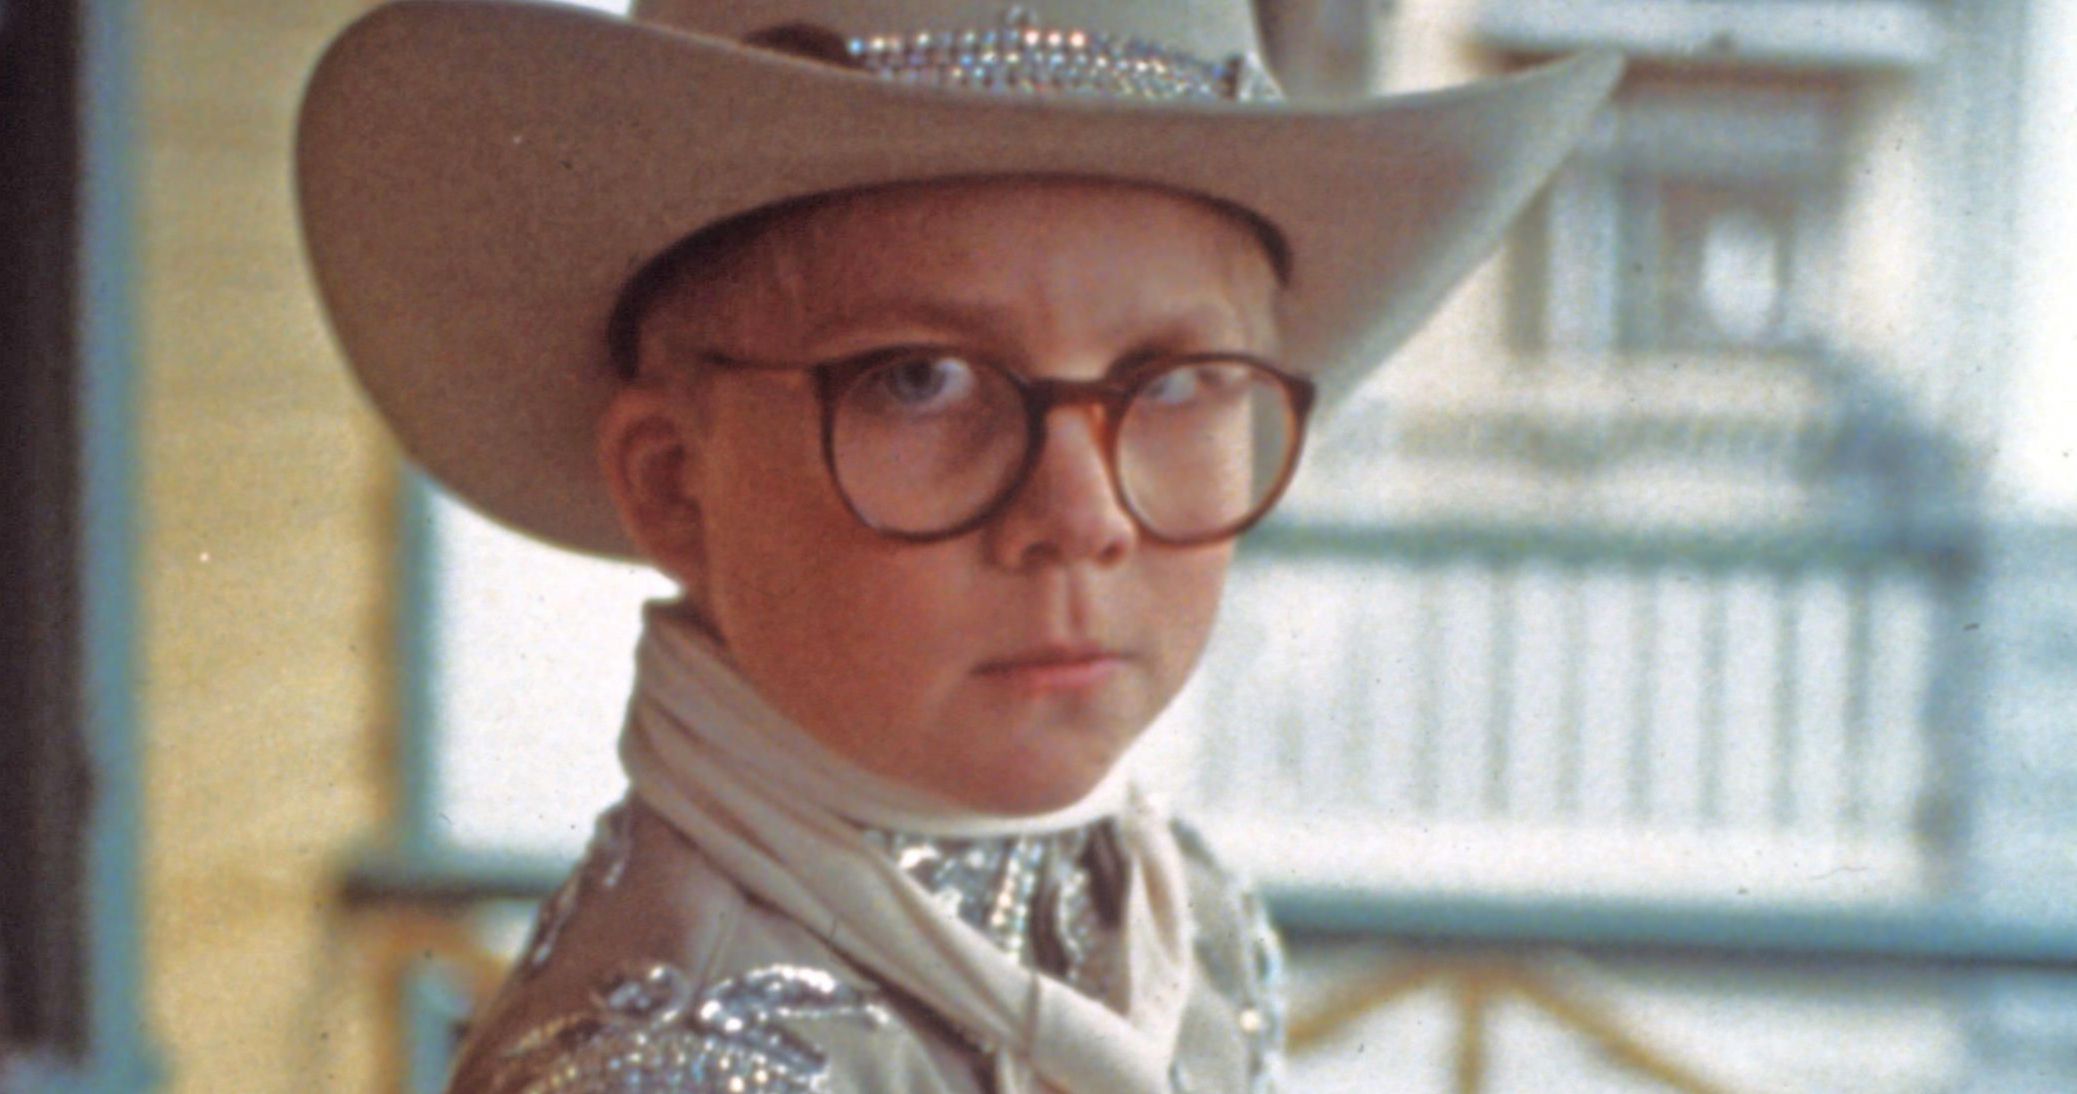 A Christmas Story Star Tells Sick Tale from the Set That Will Upset Your Stomach